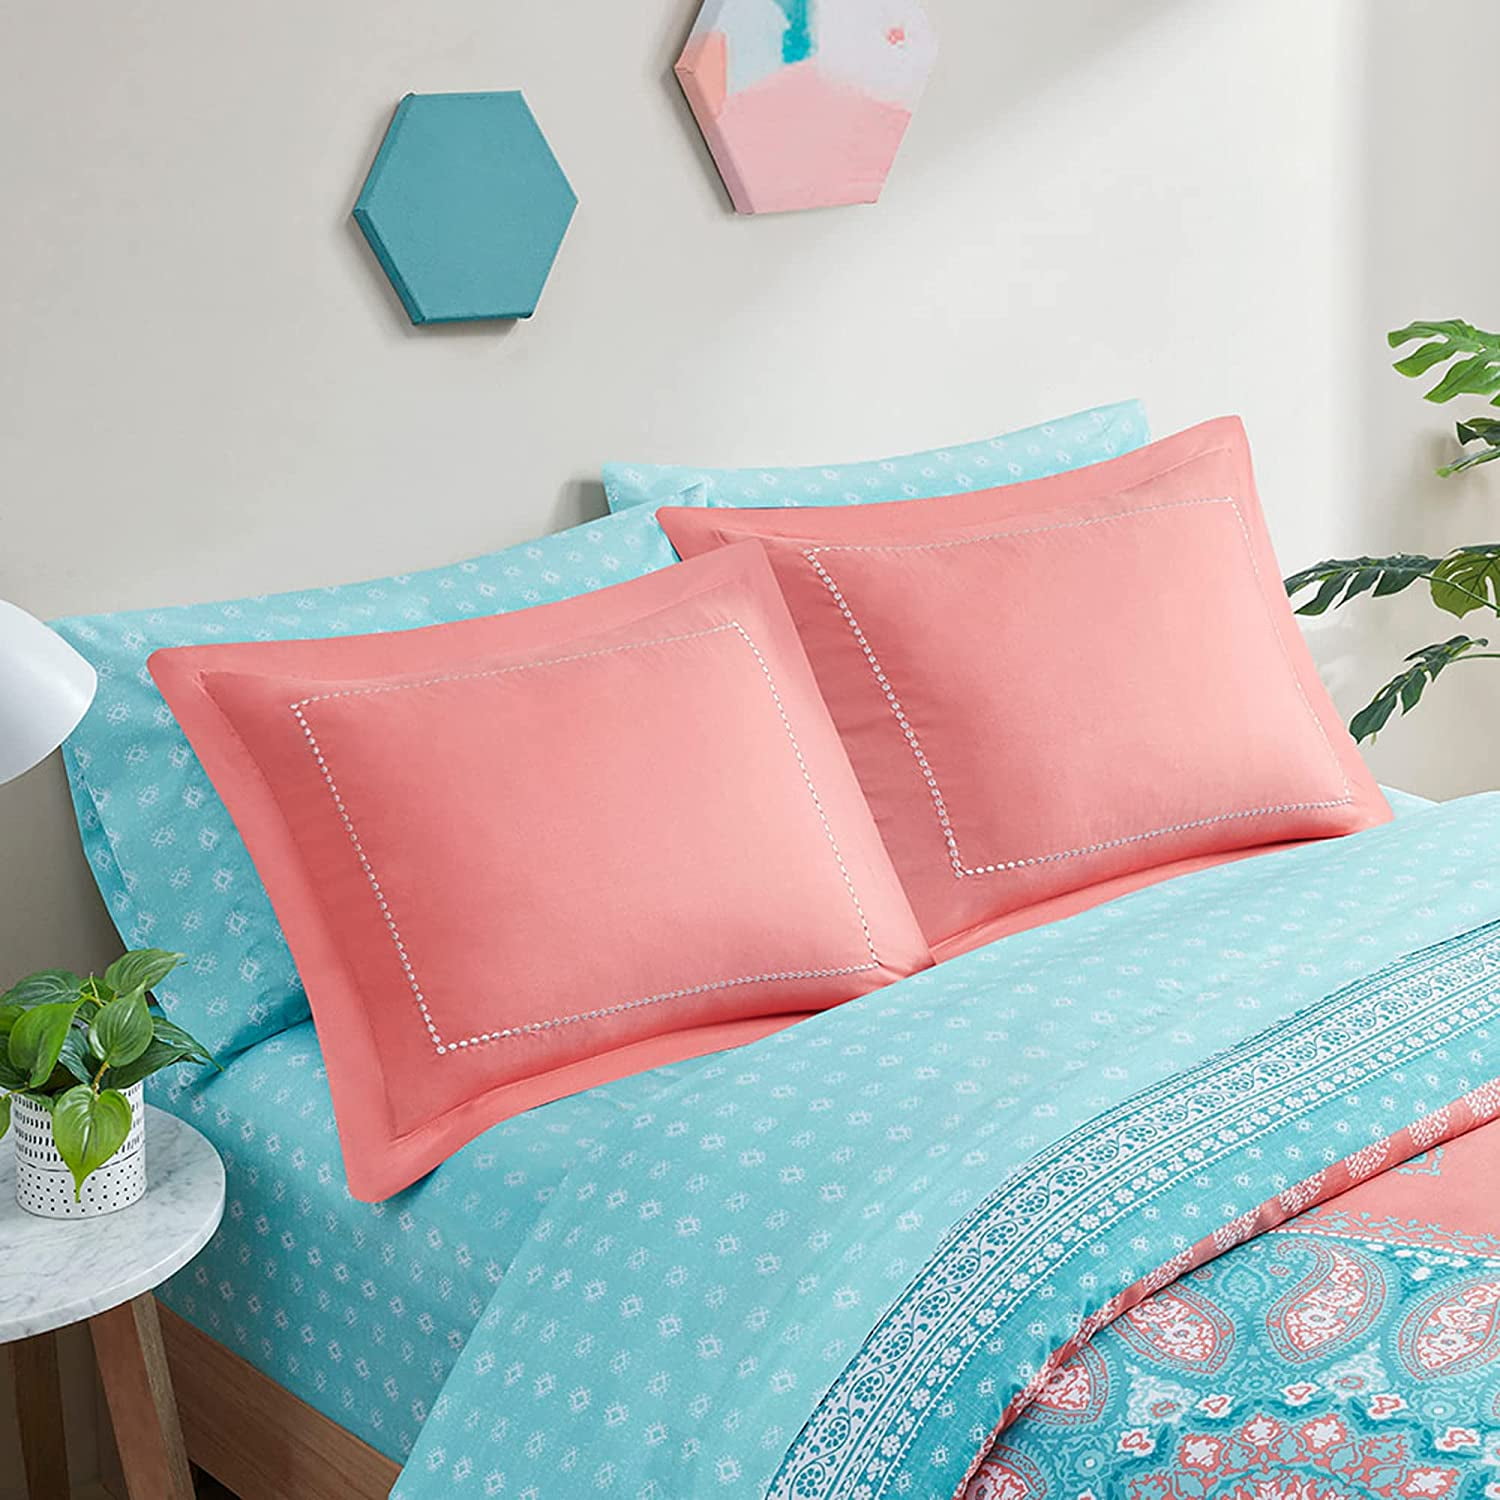 6 Piece Aqua Matching Decorative Pillow Lattice Boho Bed in A Bag Degree of Comfort Twin XL Complete Comforter Sets Microfiber Bedding Set with Side Pockets 